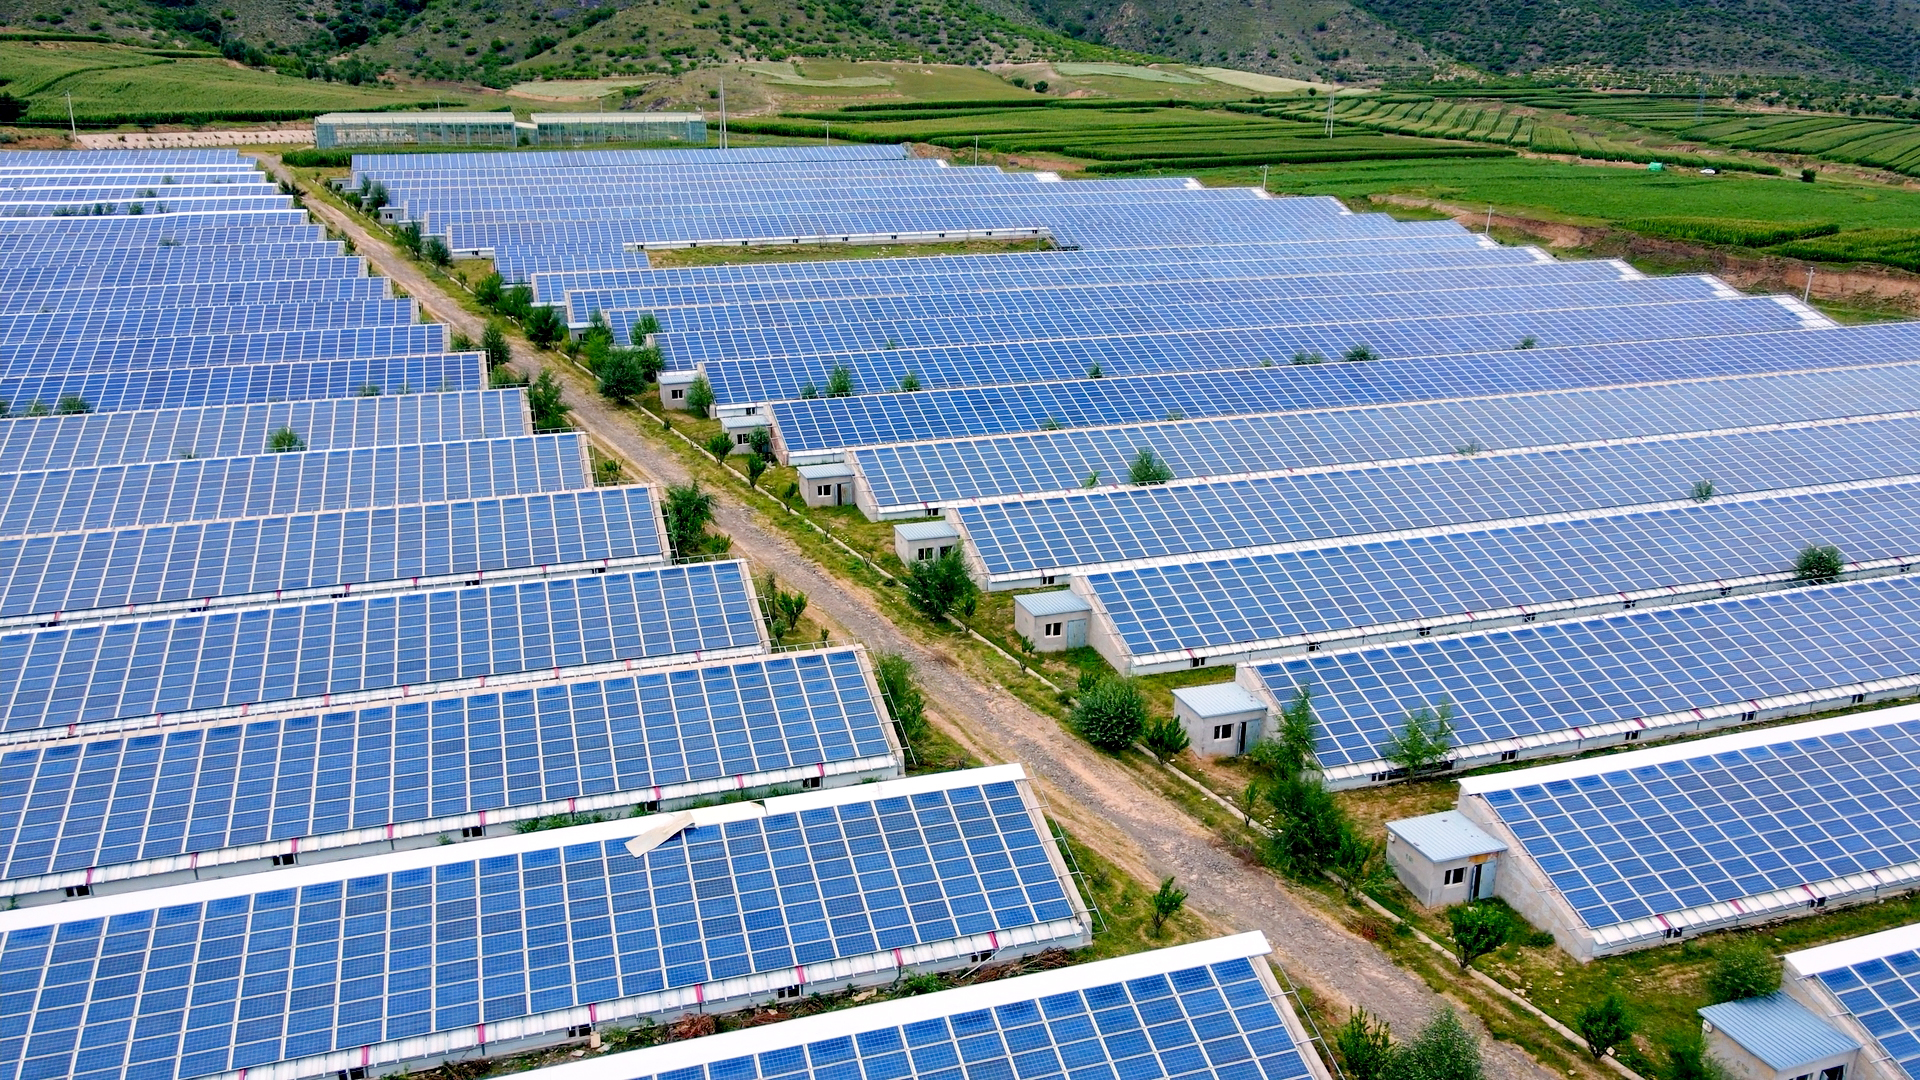 128.94GW of newly installed photovoltaic capacity in the first three quarters